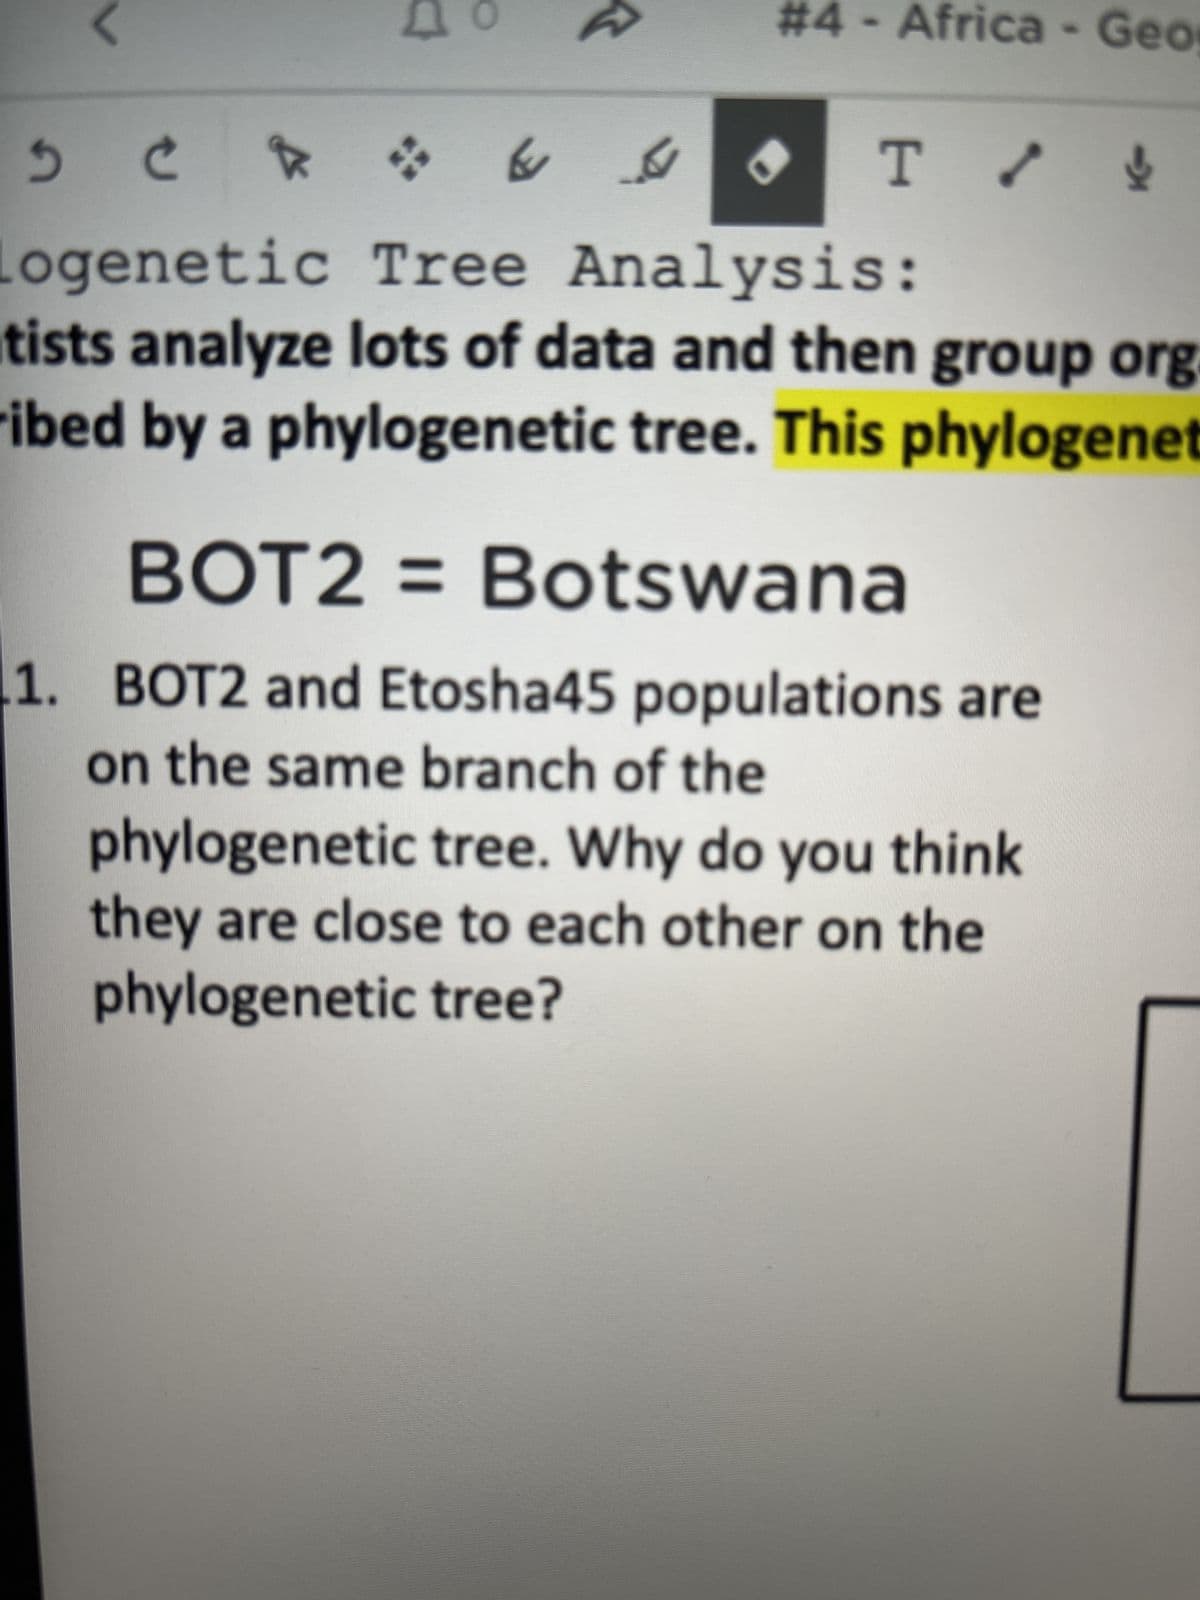 &
X
P
64
#4 - Africa - Geo
T / !
8
5 C
Logenetic Tree Analysis:
tists analyze lots of data and then group org
ribed by a phylogenetic tree. This phylogenet
BOT2= Botswana
1. BOT2 and Etosha45 populations are
on the same branch of the
phylogenetic tree. Why do you think
they are close to each other on the
phylogenetic tree?